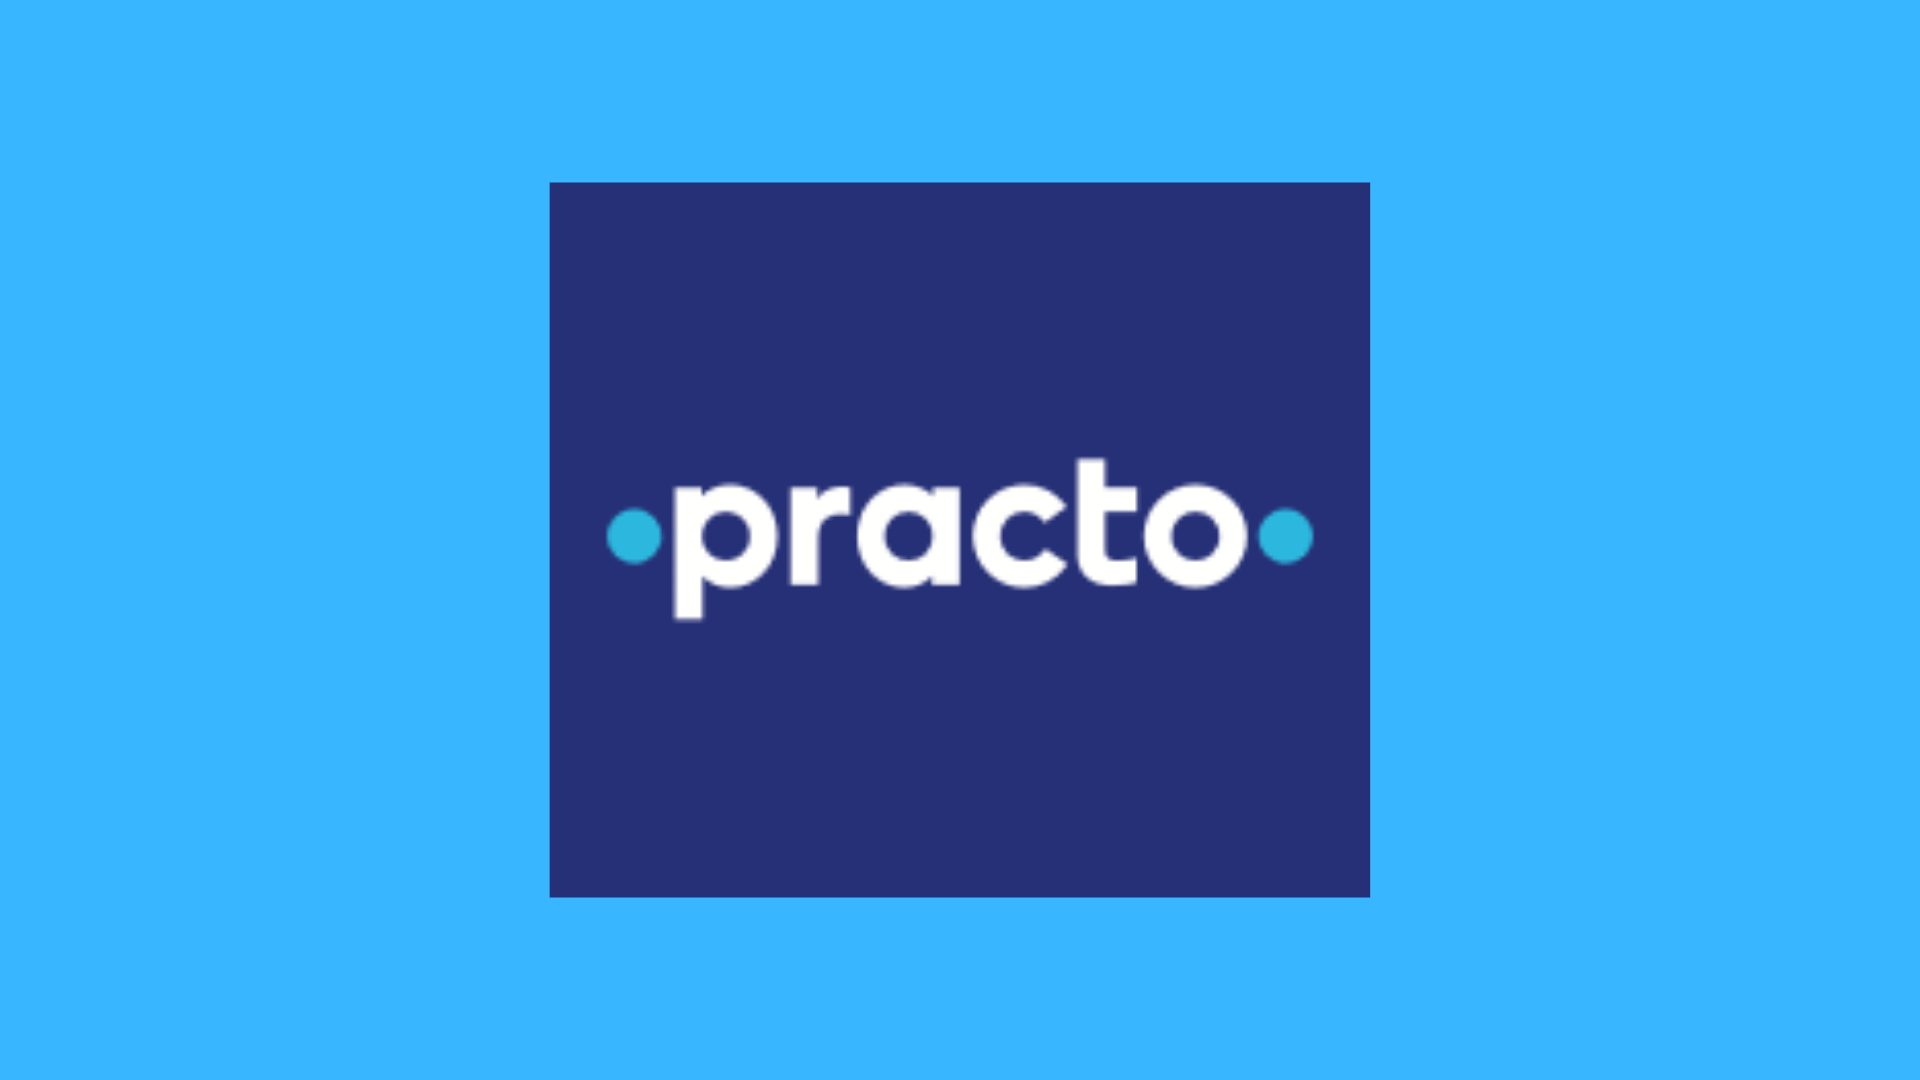 Court Of Chief Commissioner For Persons With Disabilities Asks Practo To Make Its App And Website Fully Accessible For The Disabled